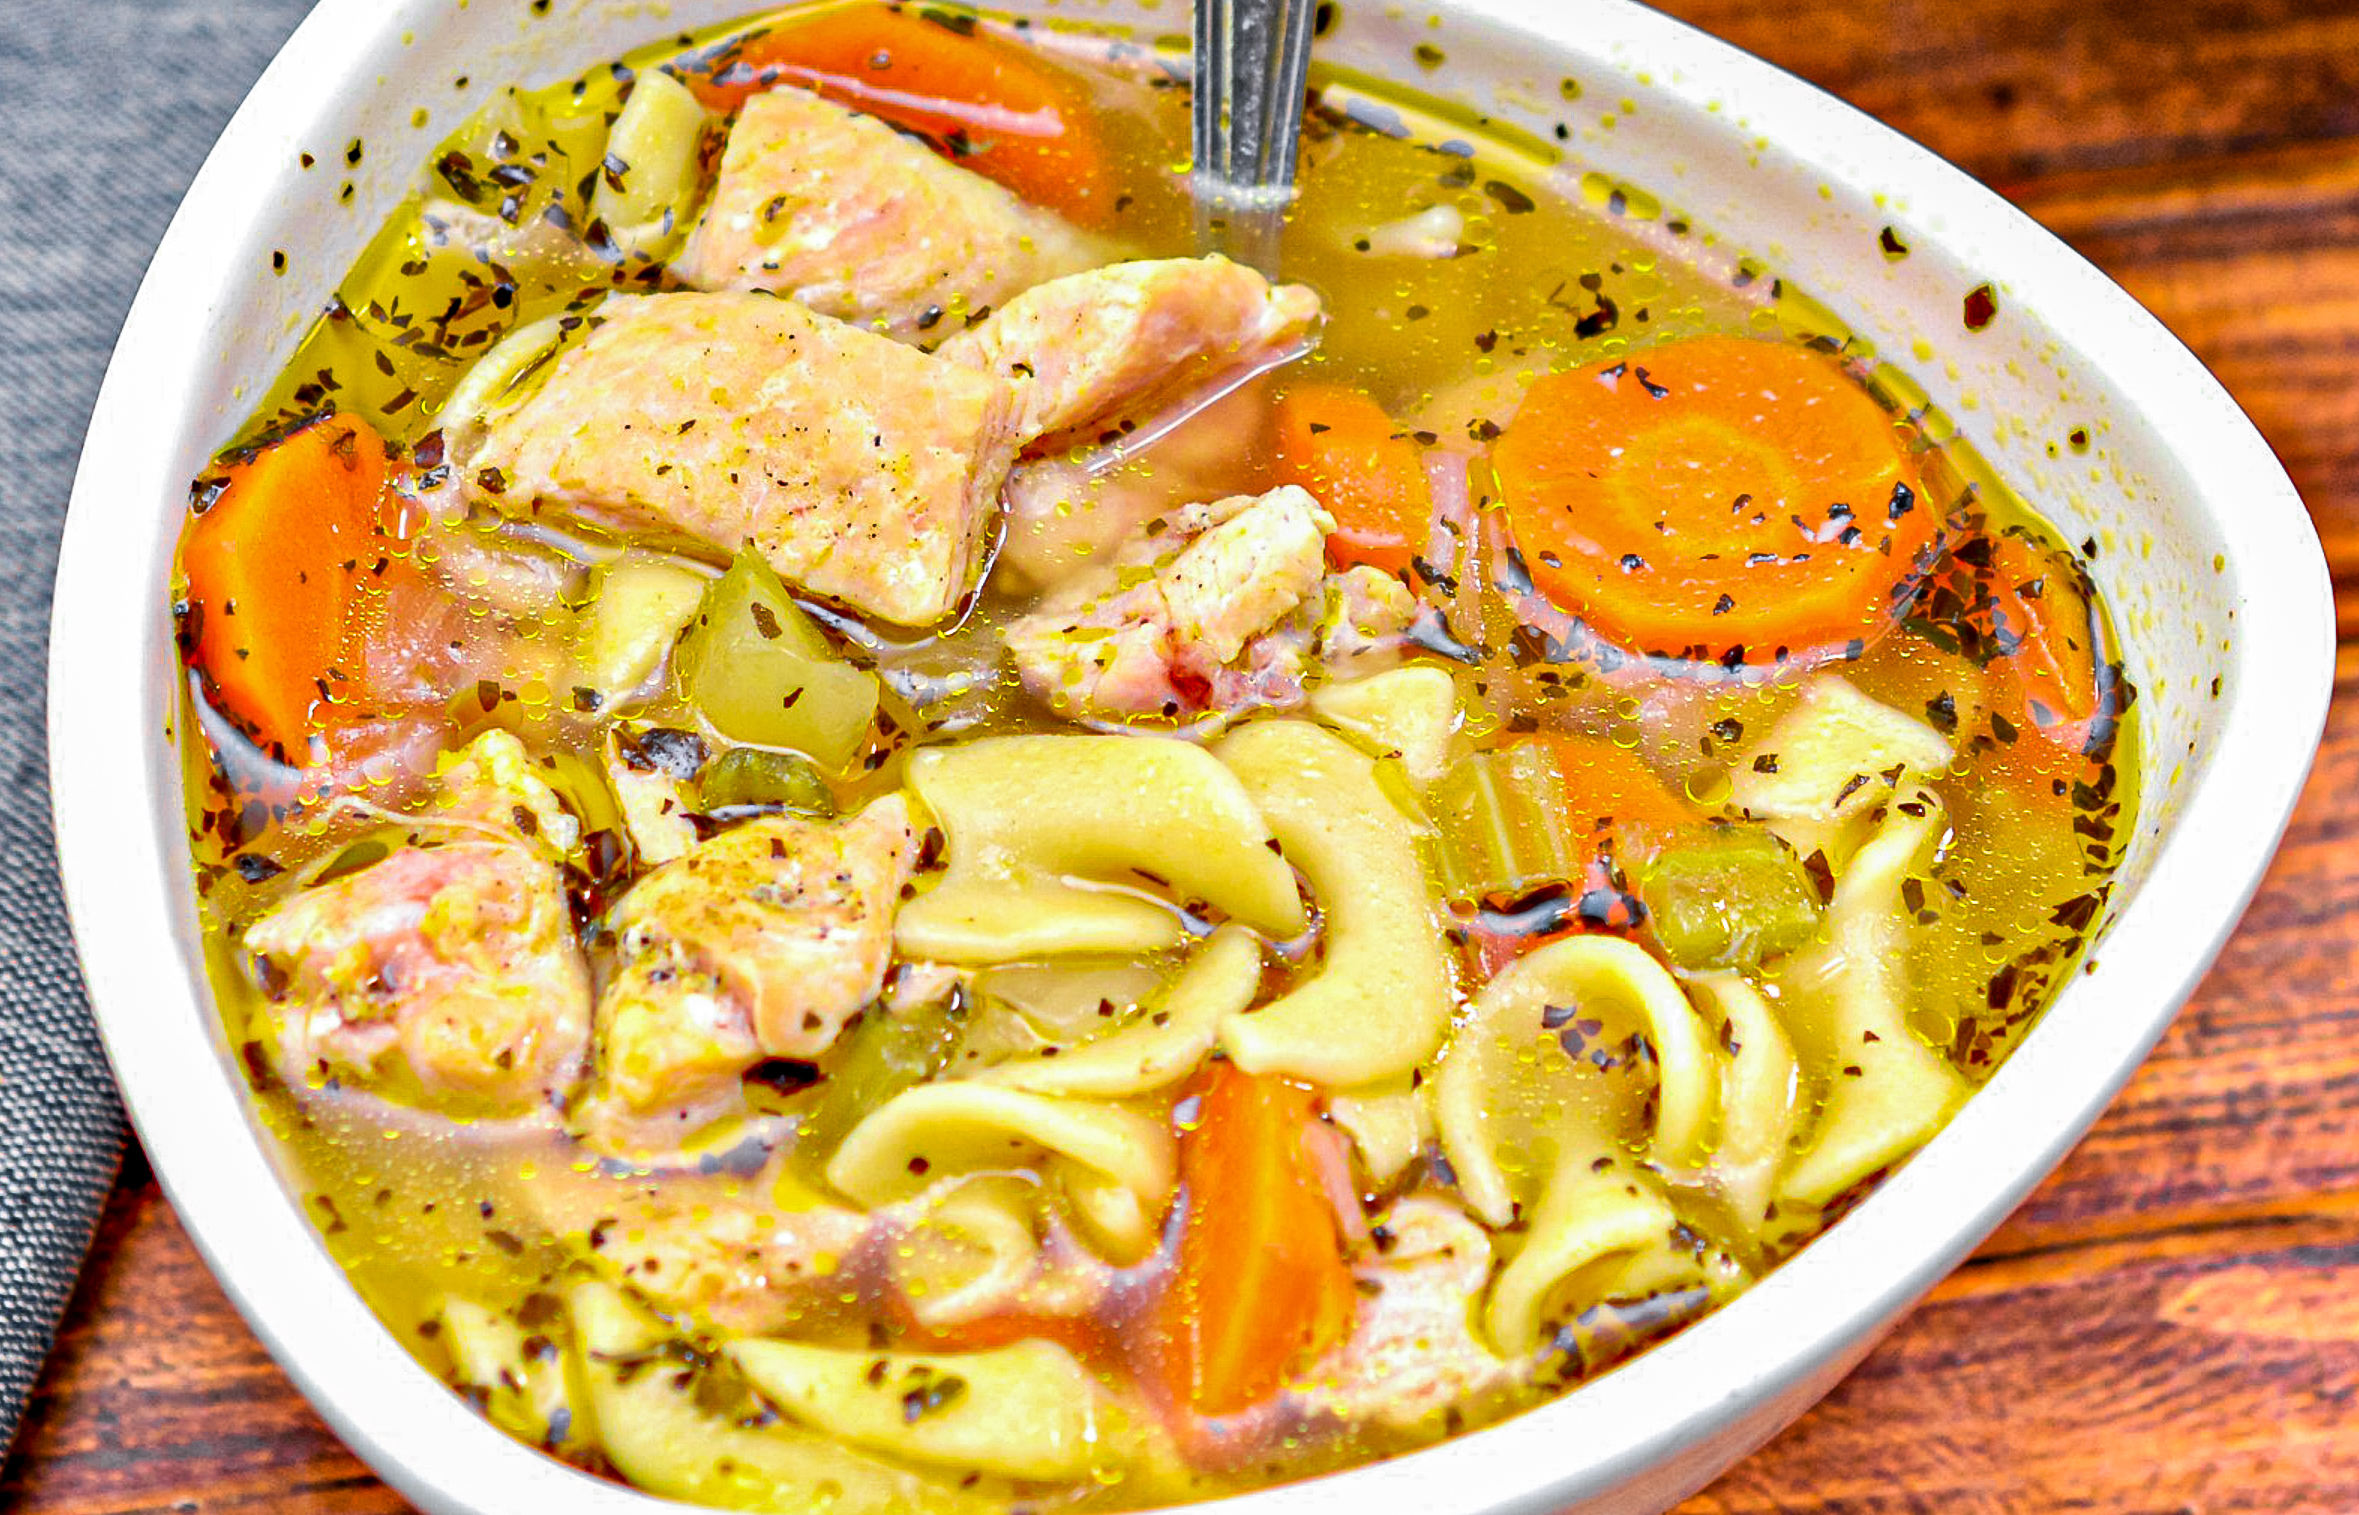 Hearty Chicken Noodle Soup